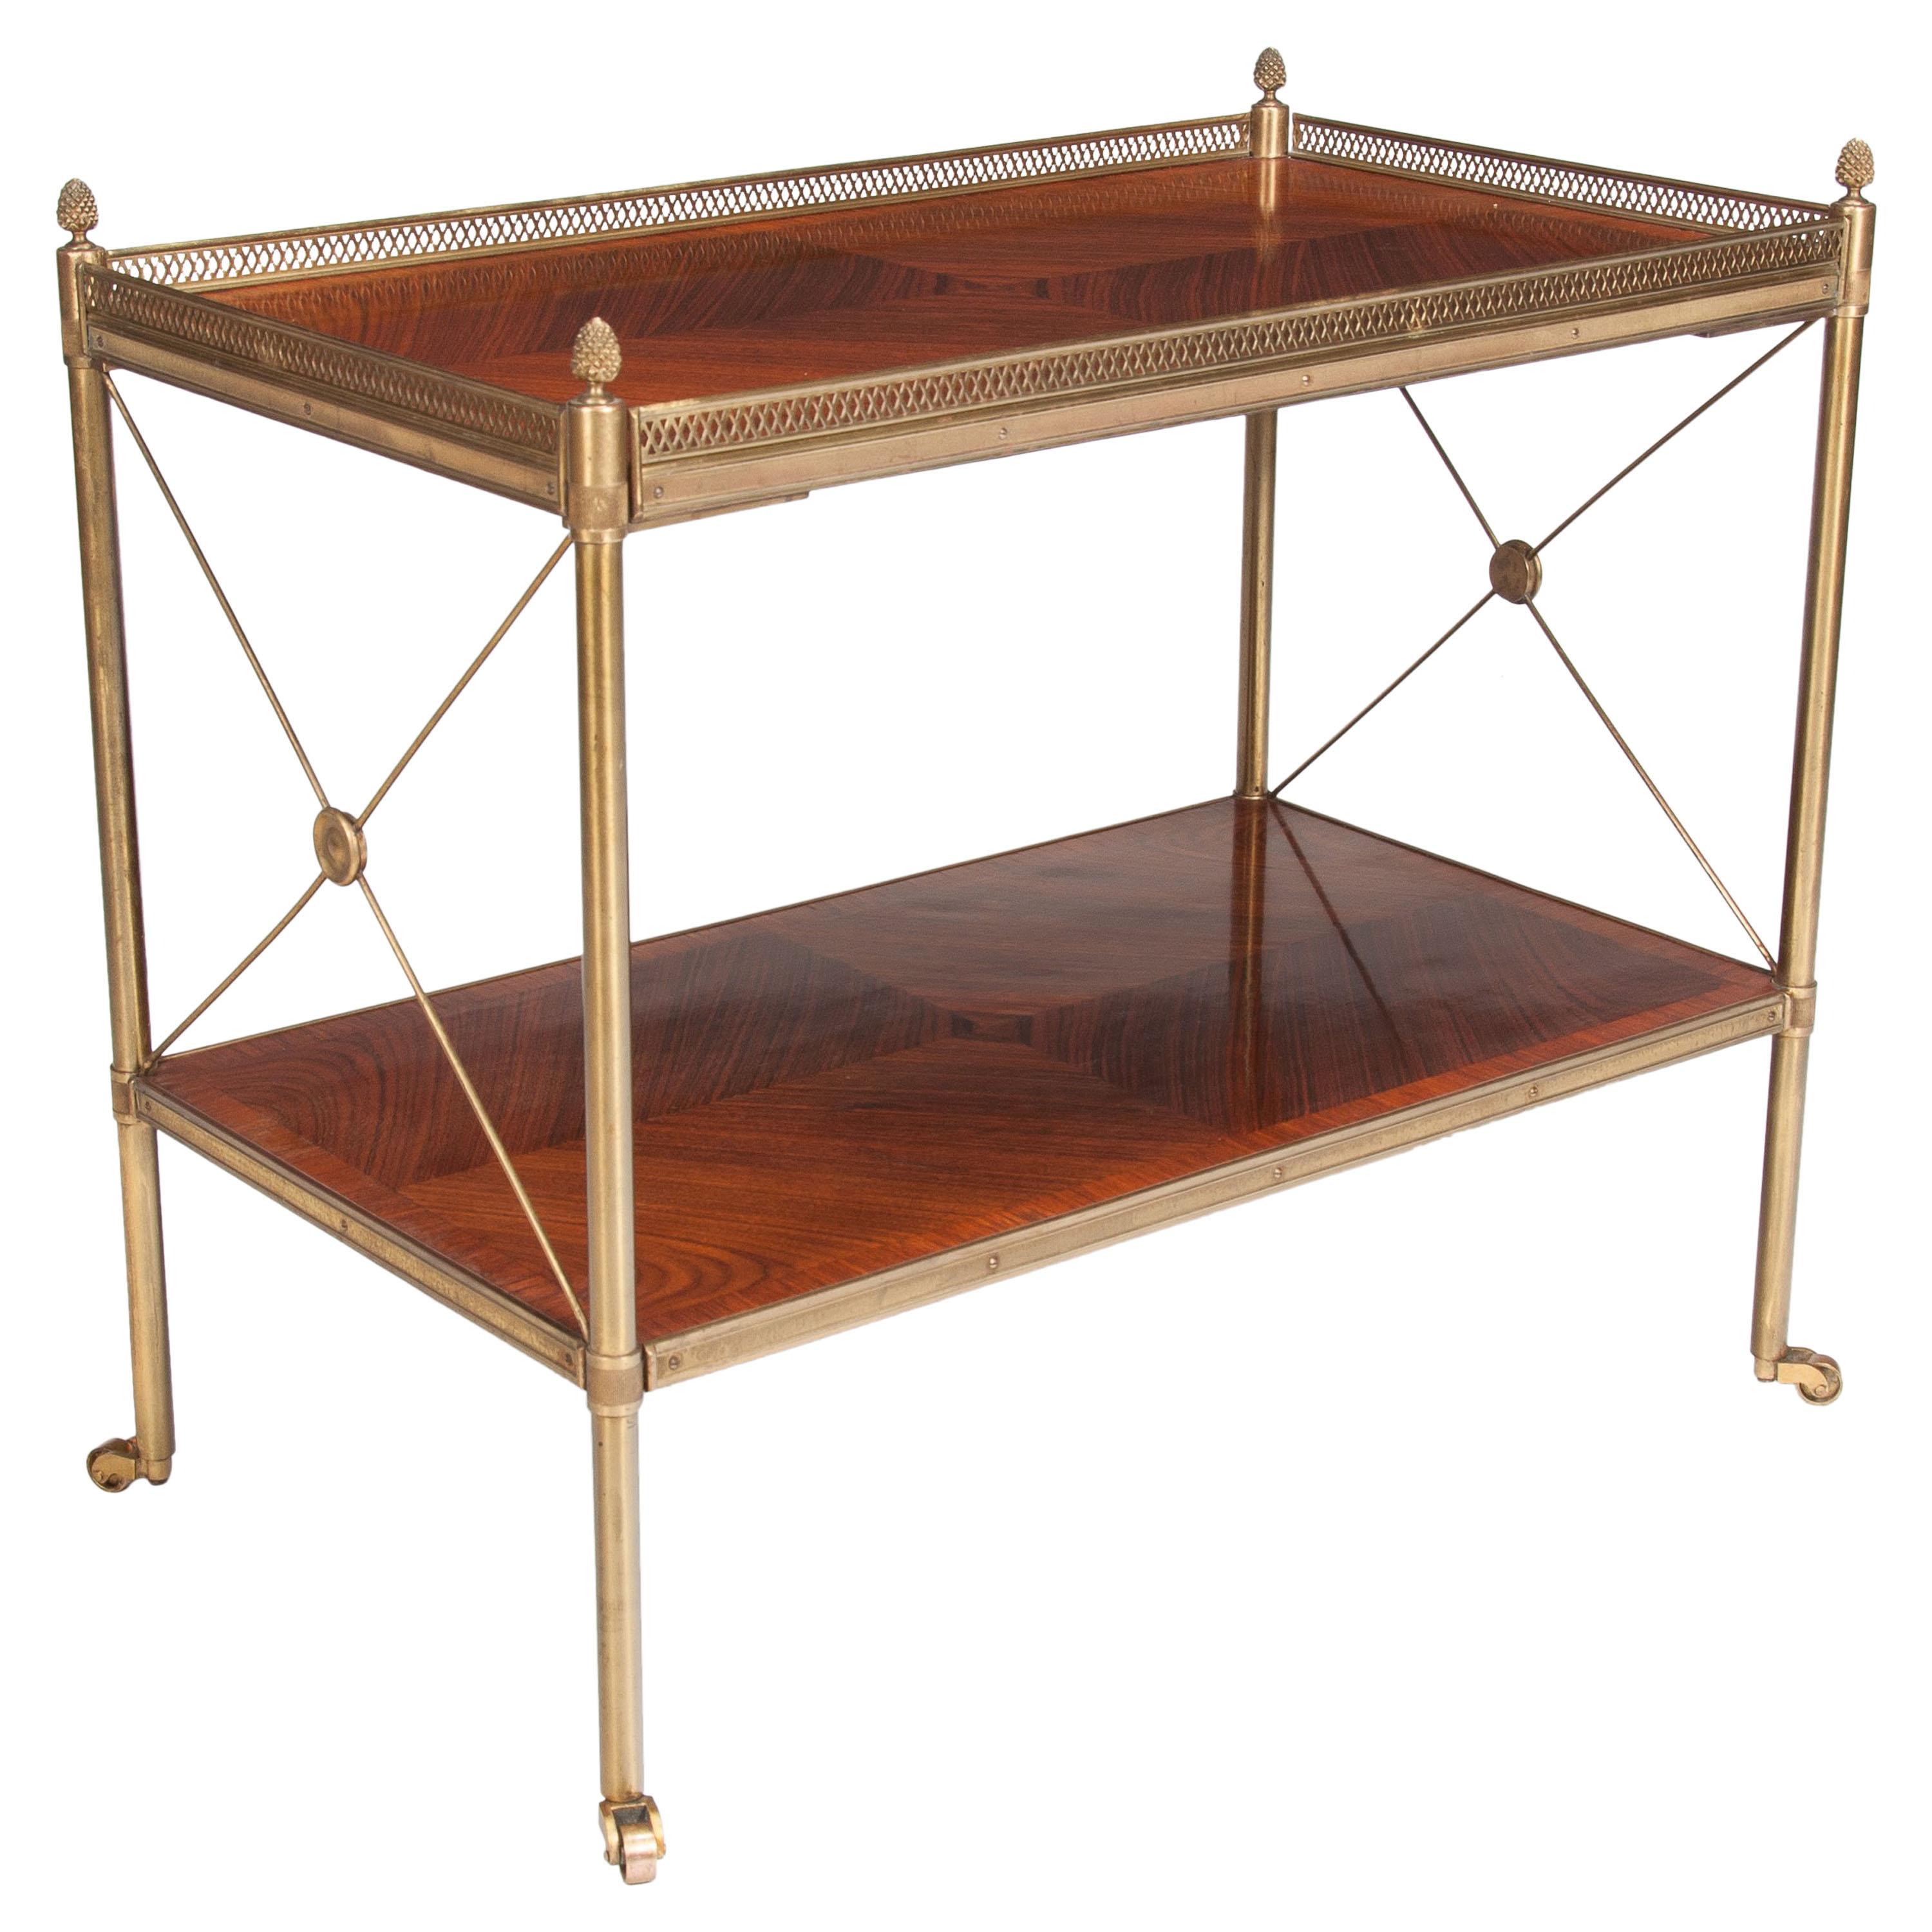 Fine Quality Kingwood and Brass Two-Tier Etagere, circa 1920